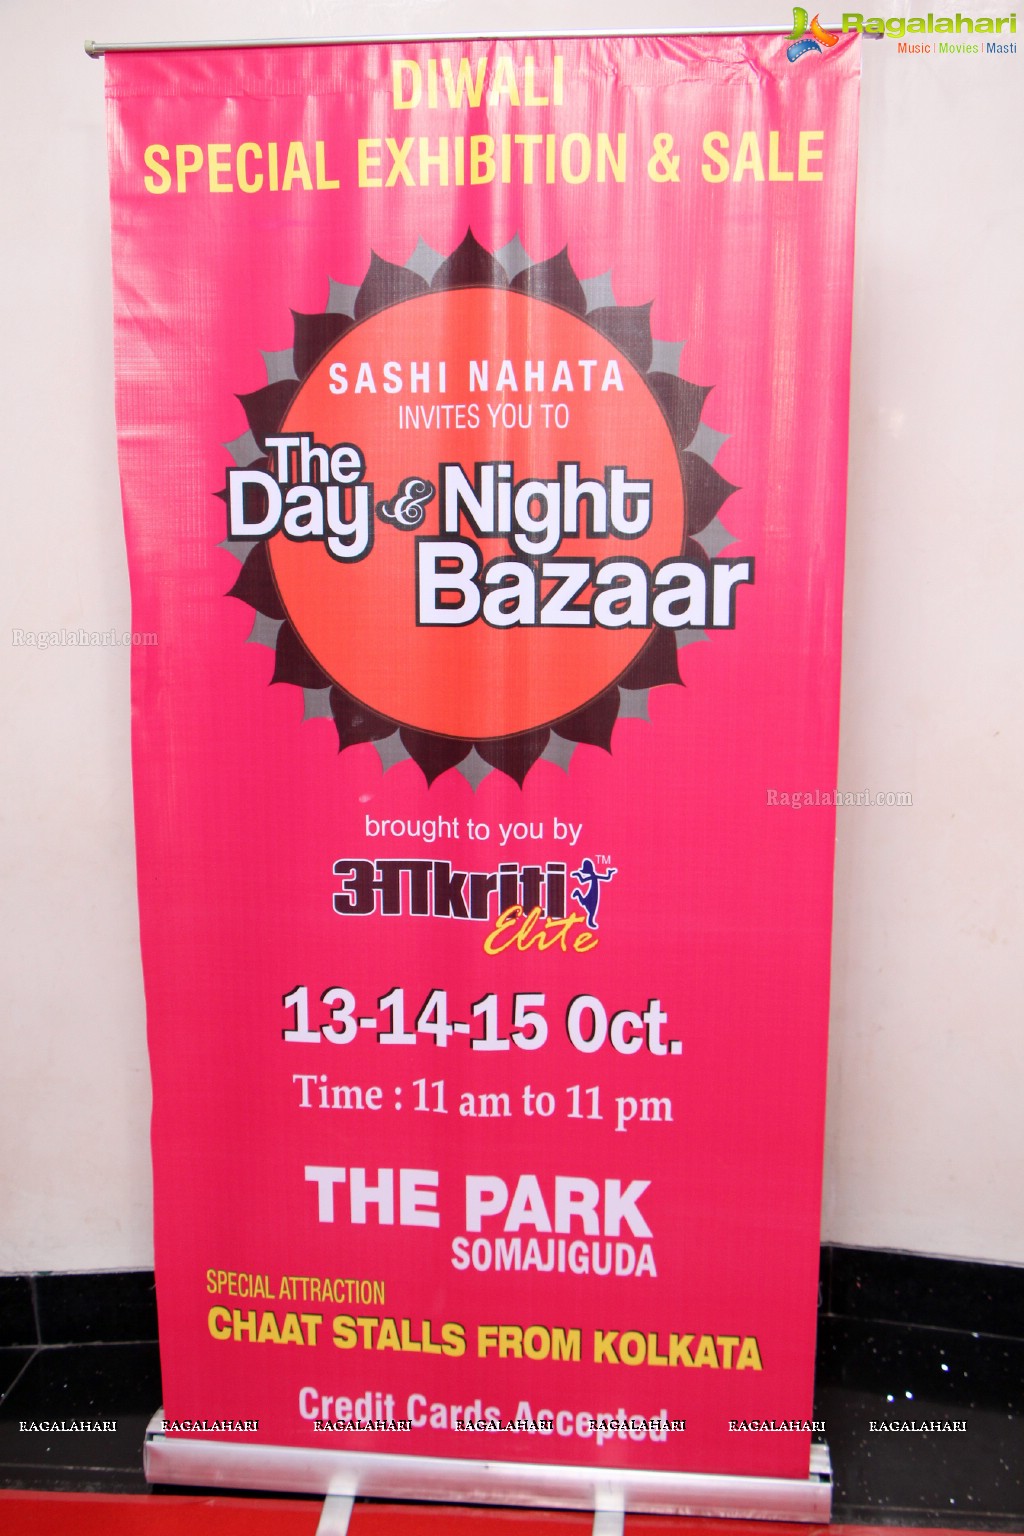 The Day and Night Bazaar by Akritti Elite at The Park